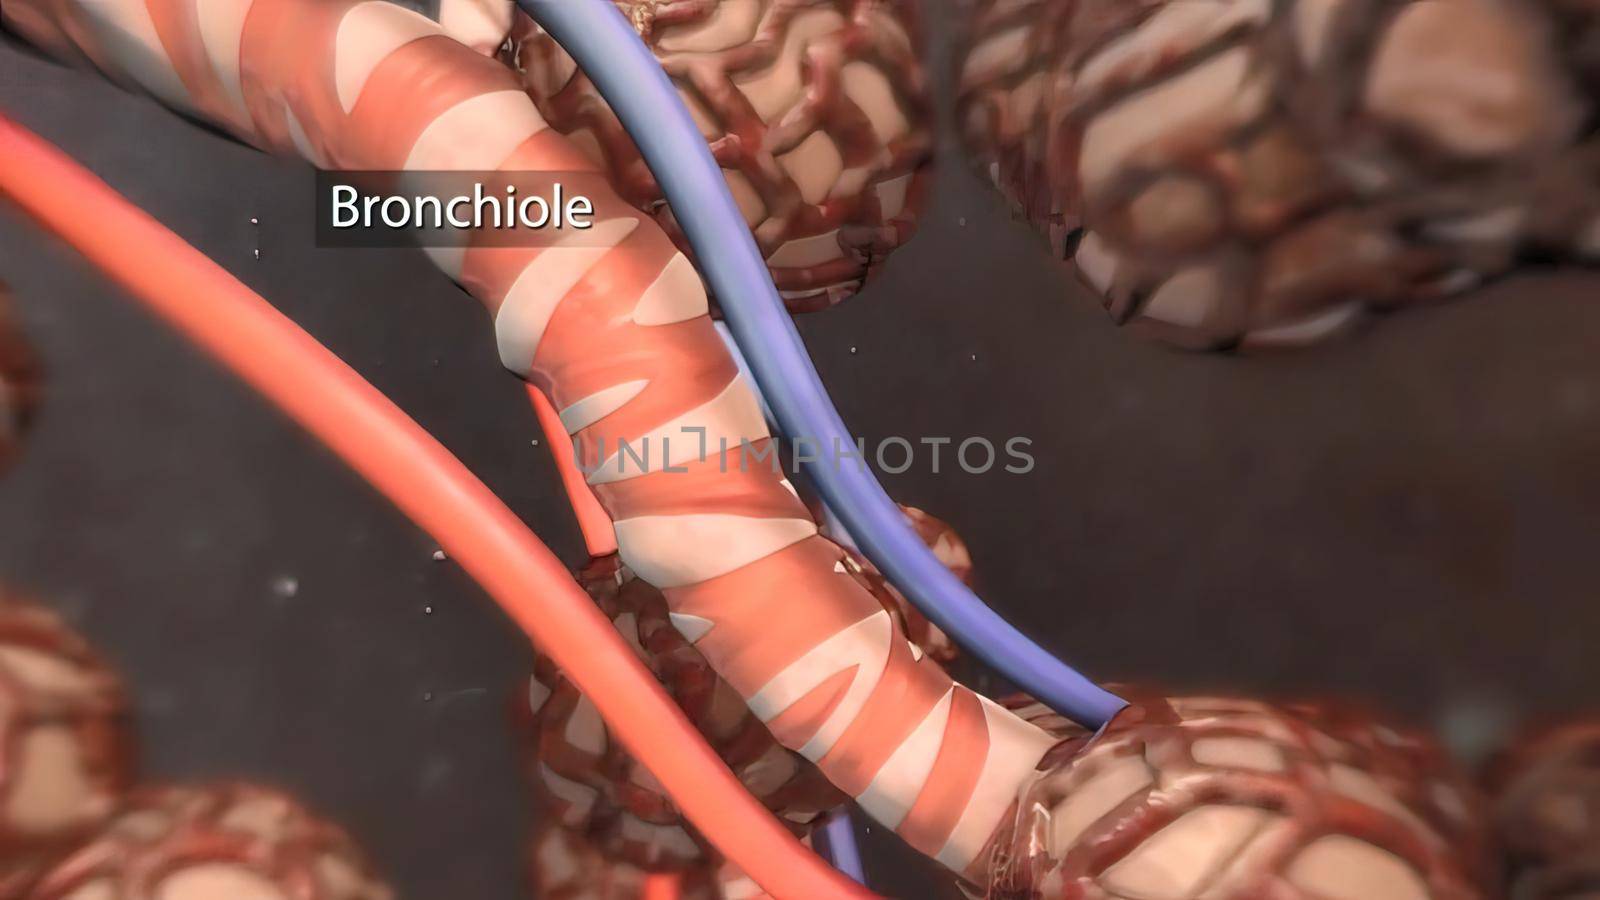 The bronchi are extensions of the windpipe that carries air to the lungs by creativepic